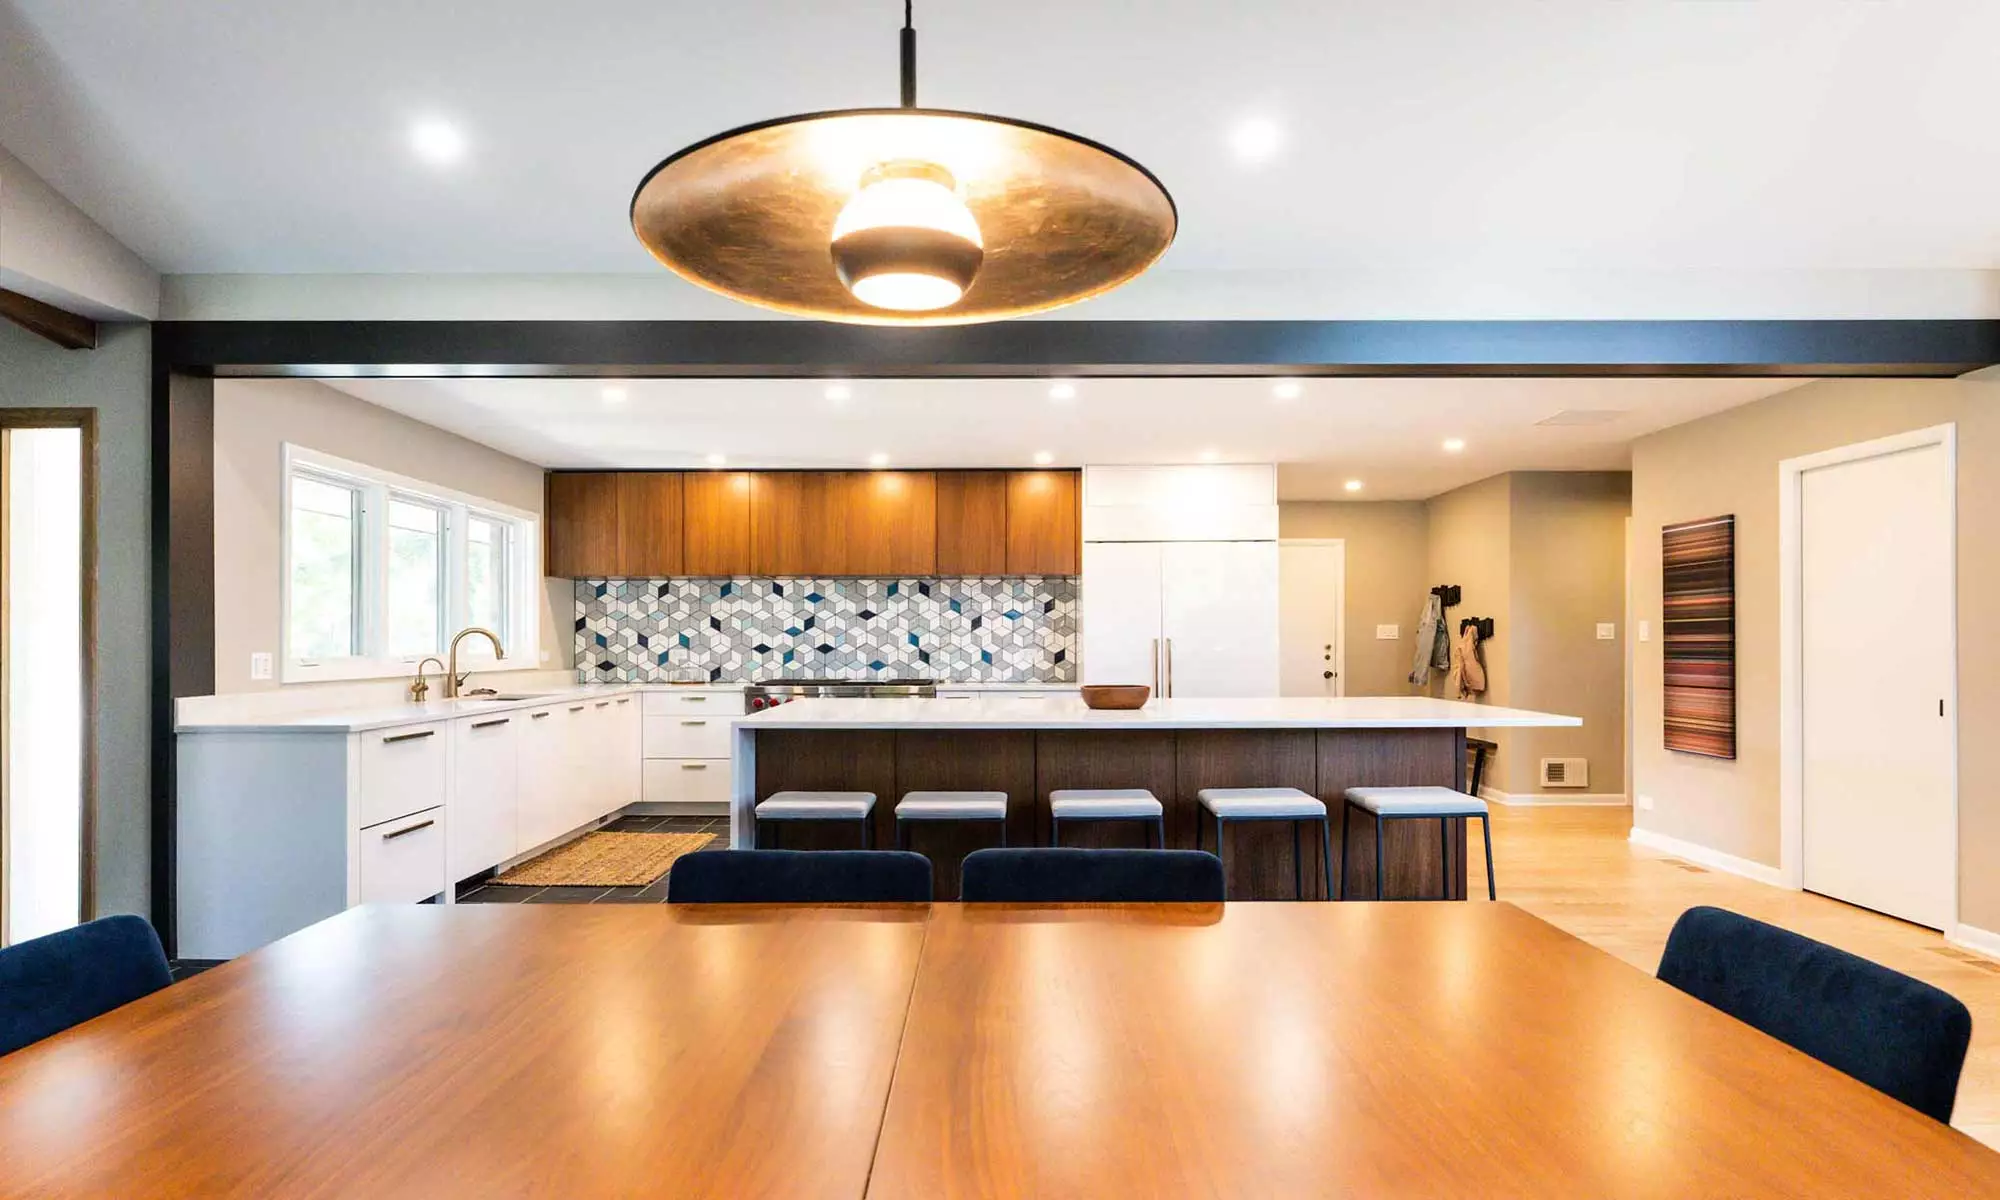 view of dining area with pendant light and kitchen beyond in luxury mid-century remodel